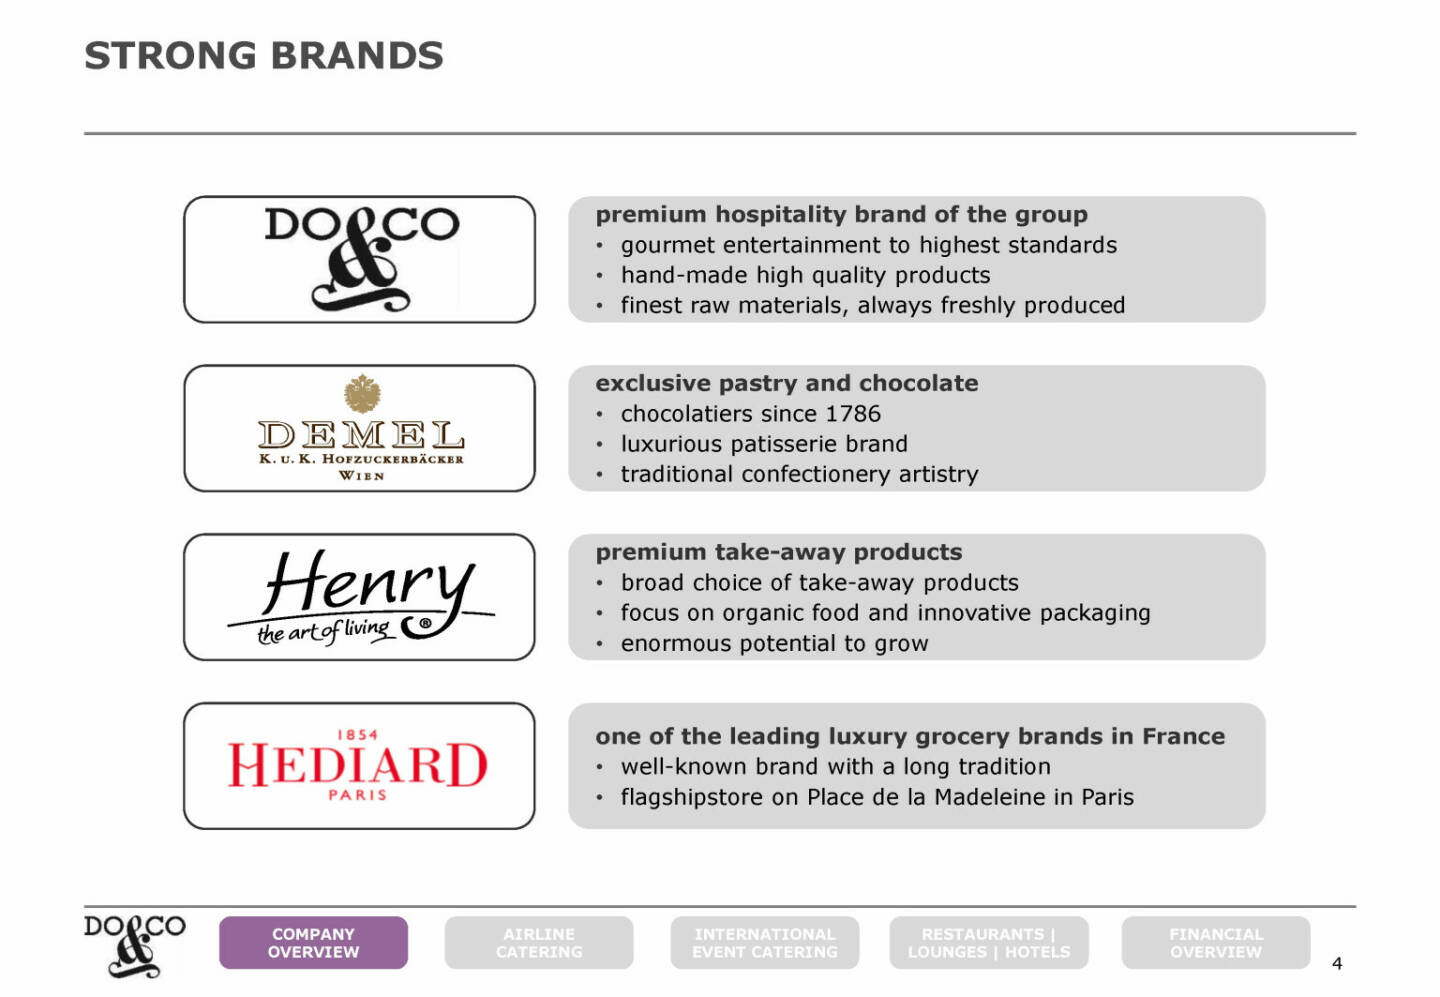 Do&Co - STRONG BRANDS